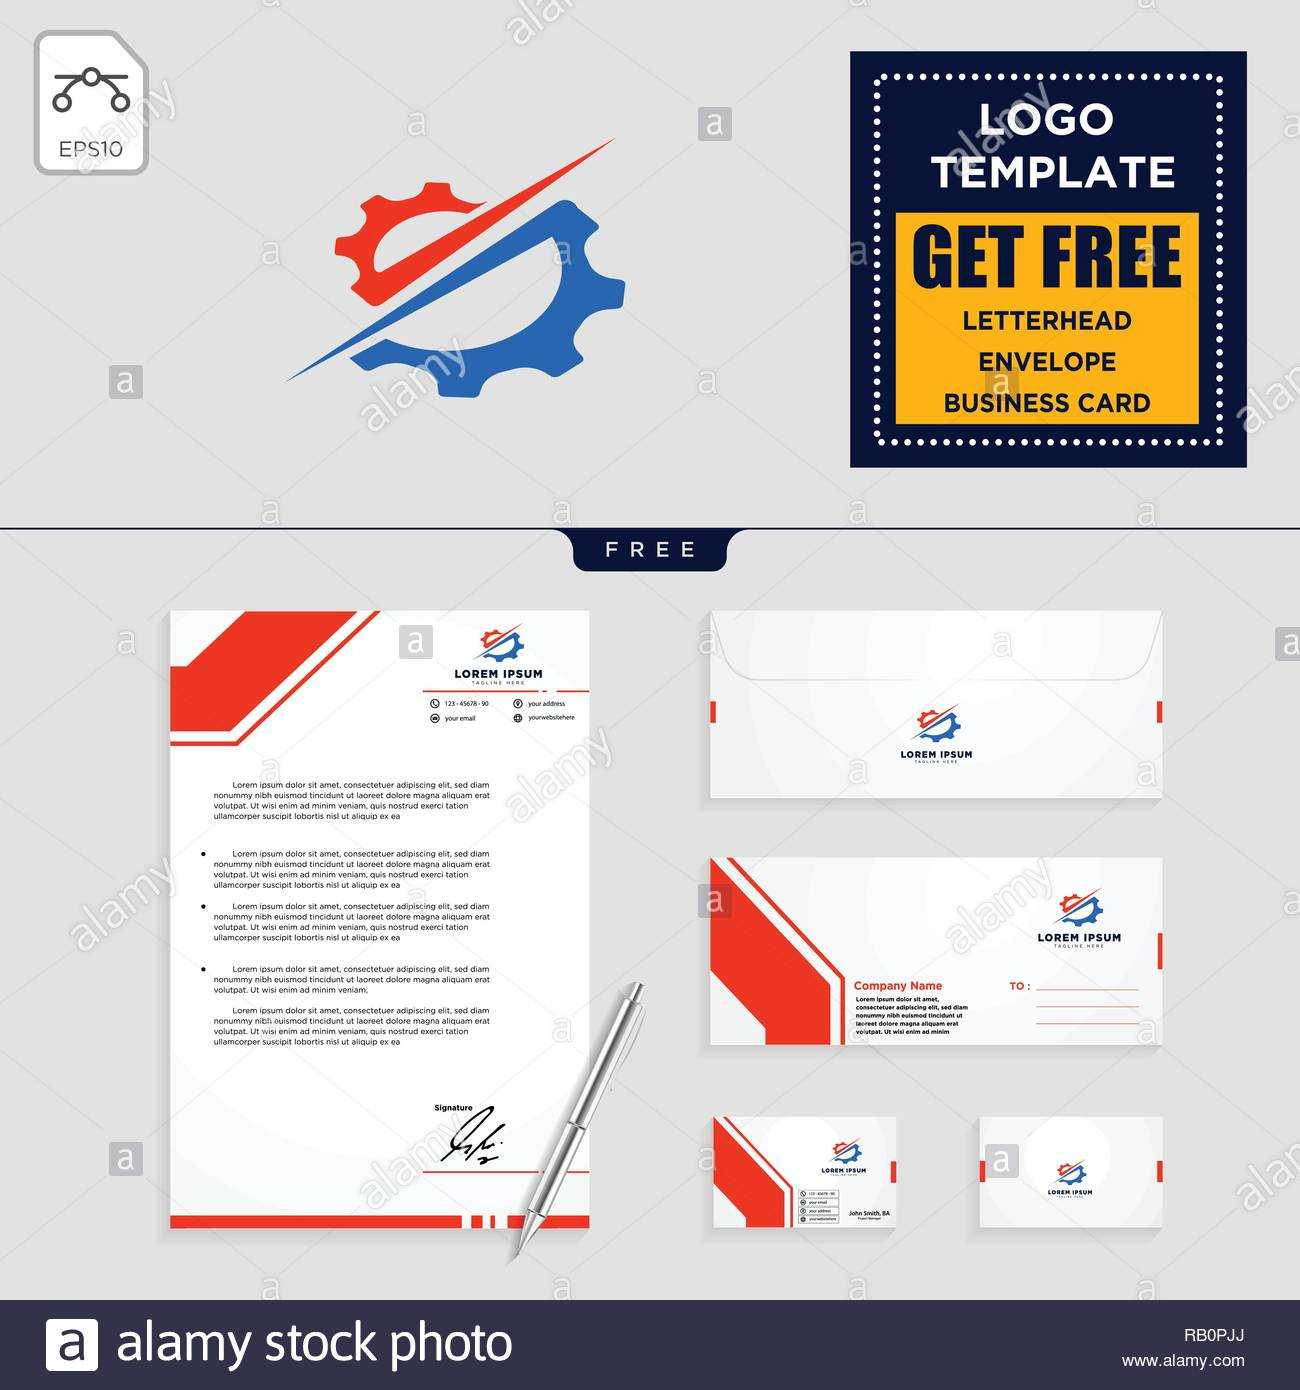 Gear, And Business Chart Logo Template Vector Illustration Pertaining To Business Card Letterhead Envelope Template